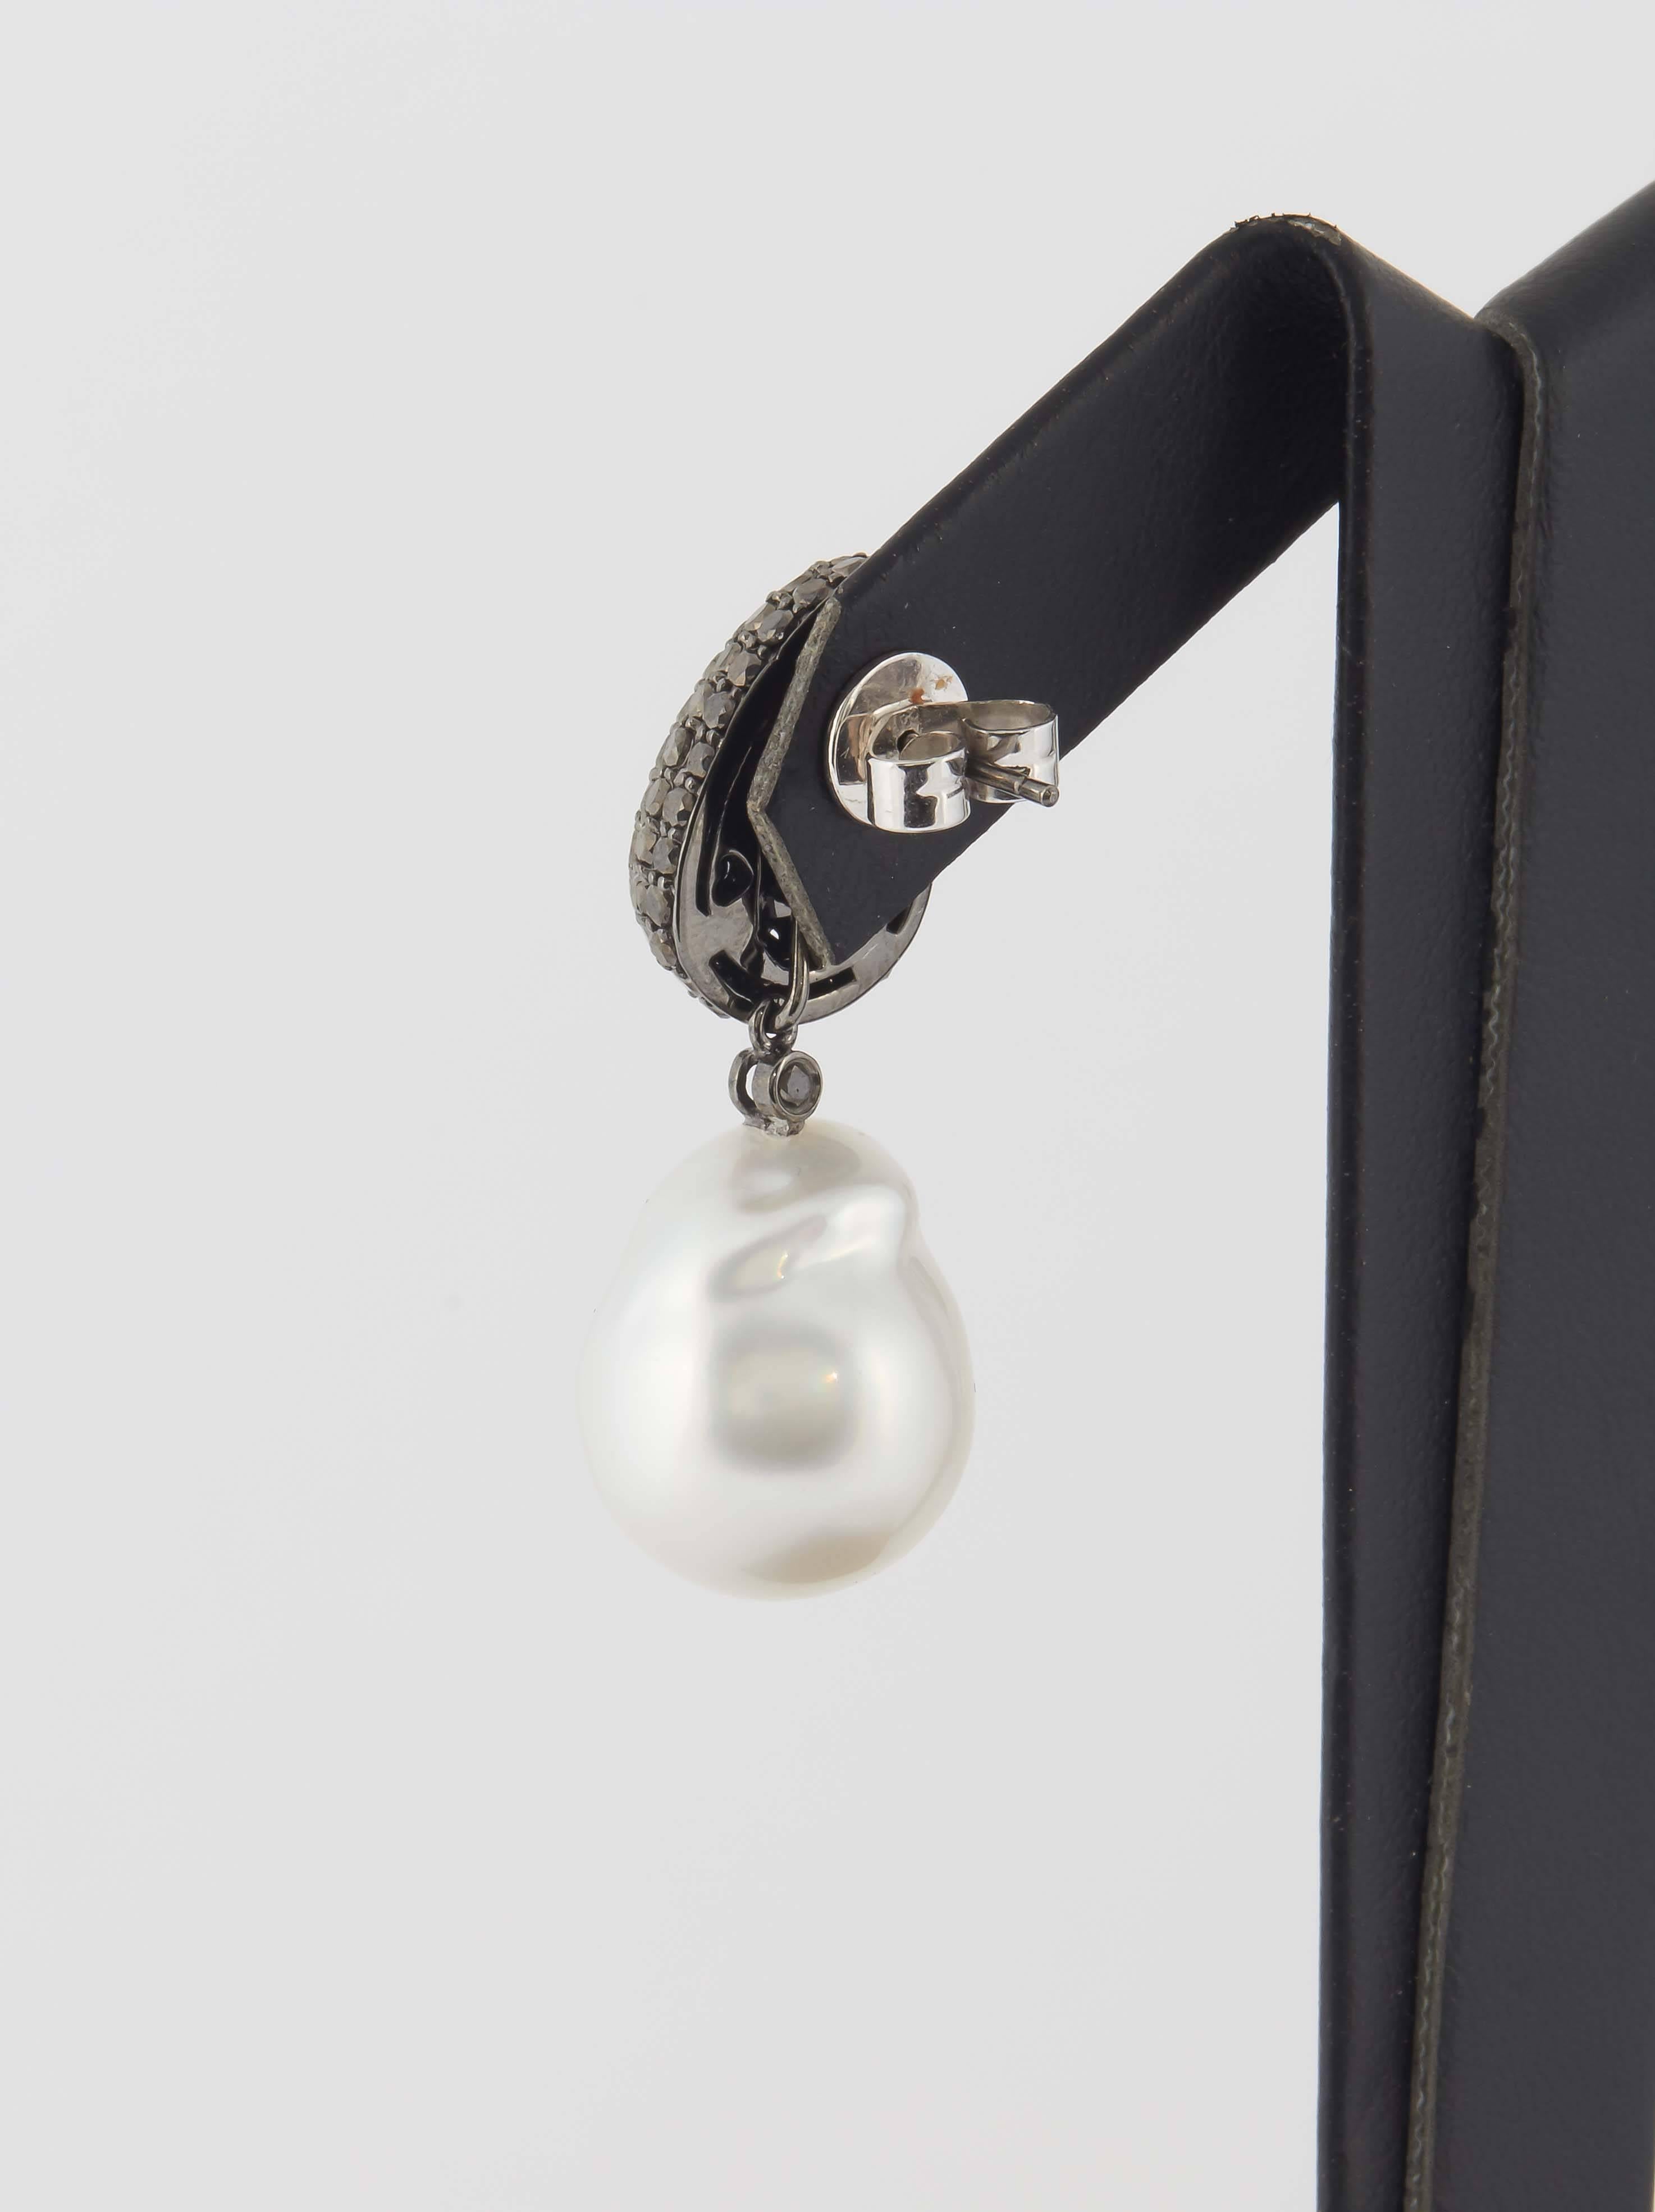 Contemporary Day & Night South Sea Pearl Black Diamond Drop Earrings 3.10 Carats 18K Gold  For Sale